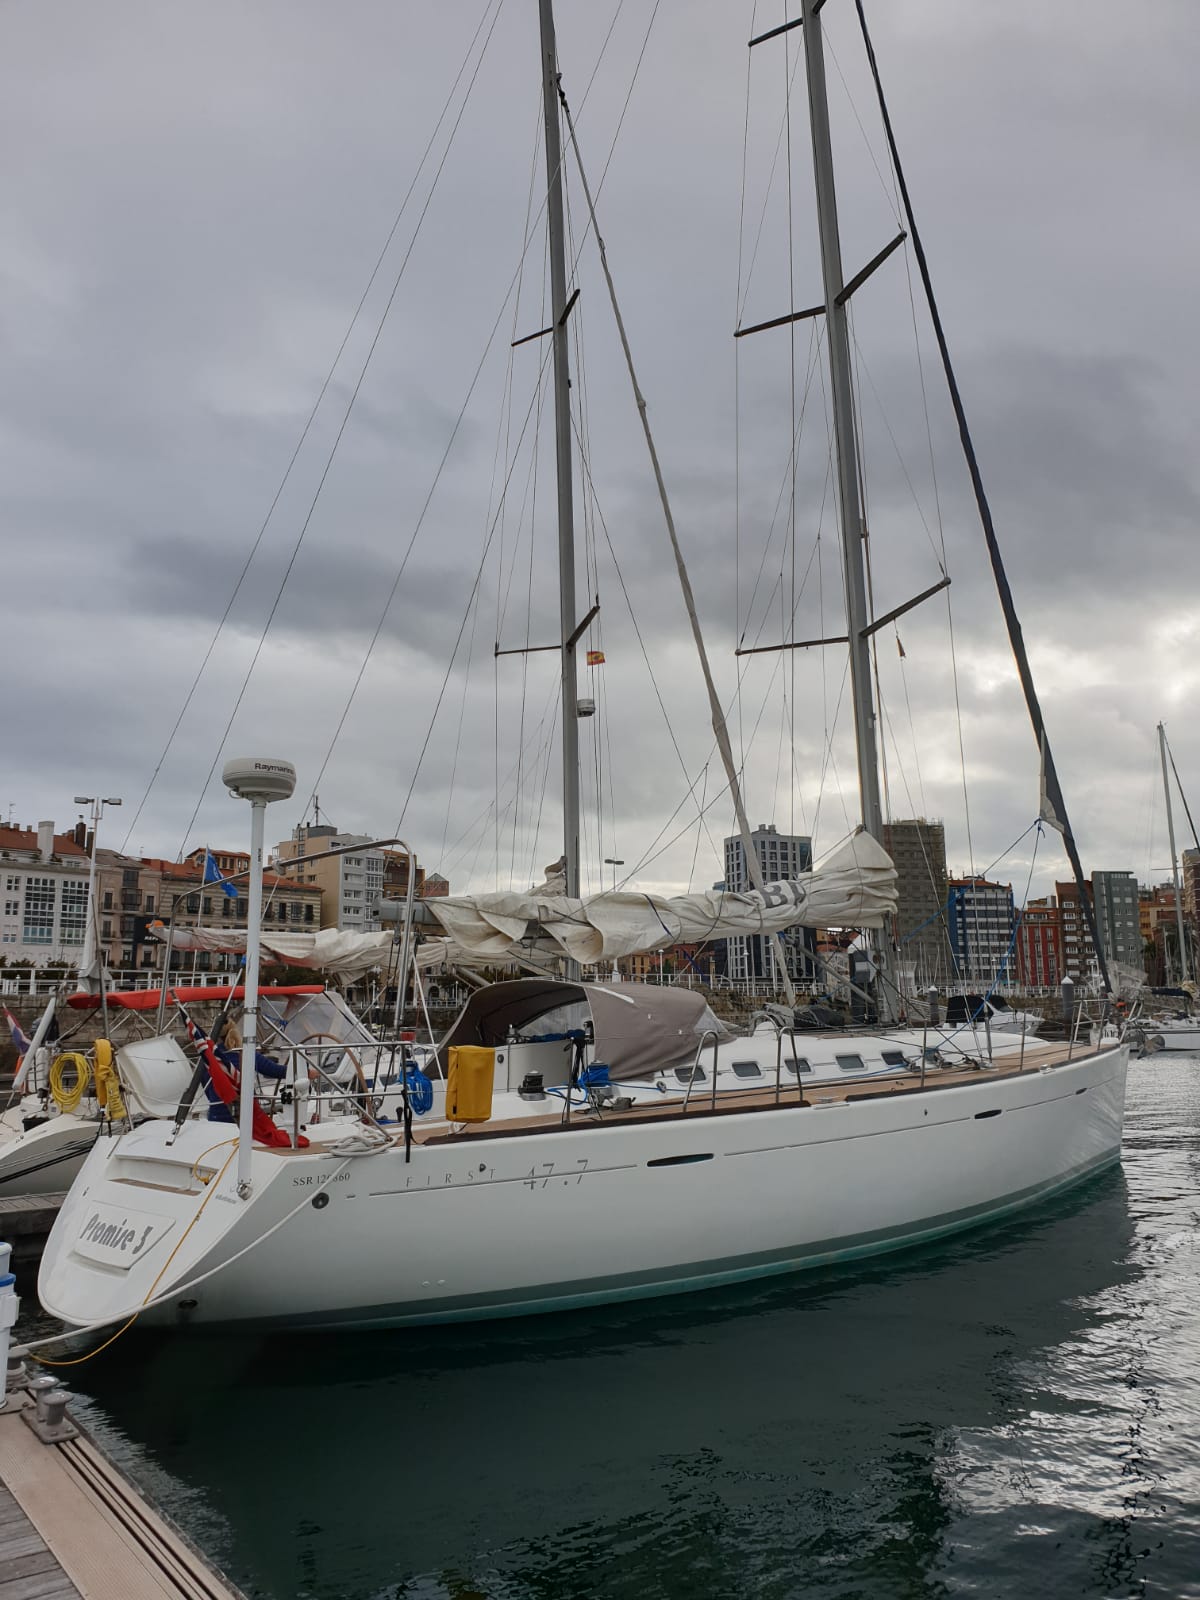 Beneteau First 47.7 yacht ready to set sail on delivery to France